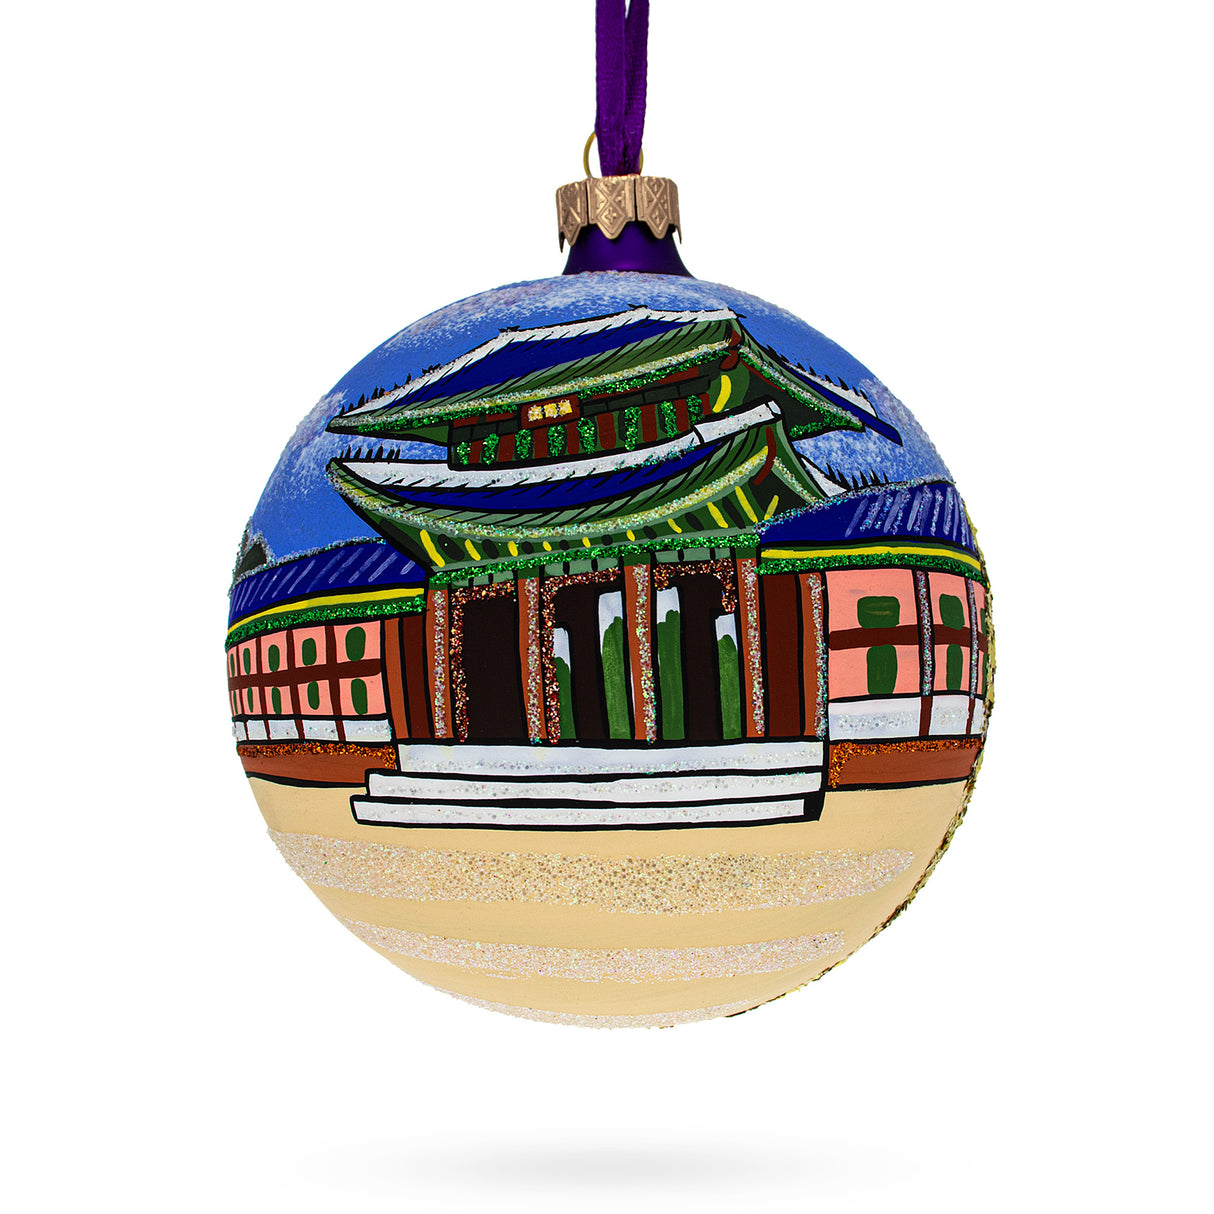 Gyeongbokgung Palace, Seoul, South Korea Glass Ball Christmas Ornament 4 Inches in Multi color, Round shape